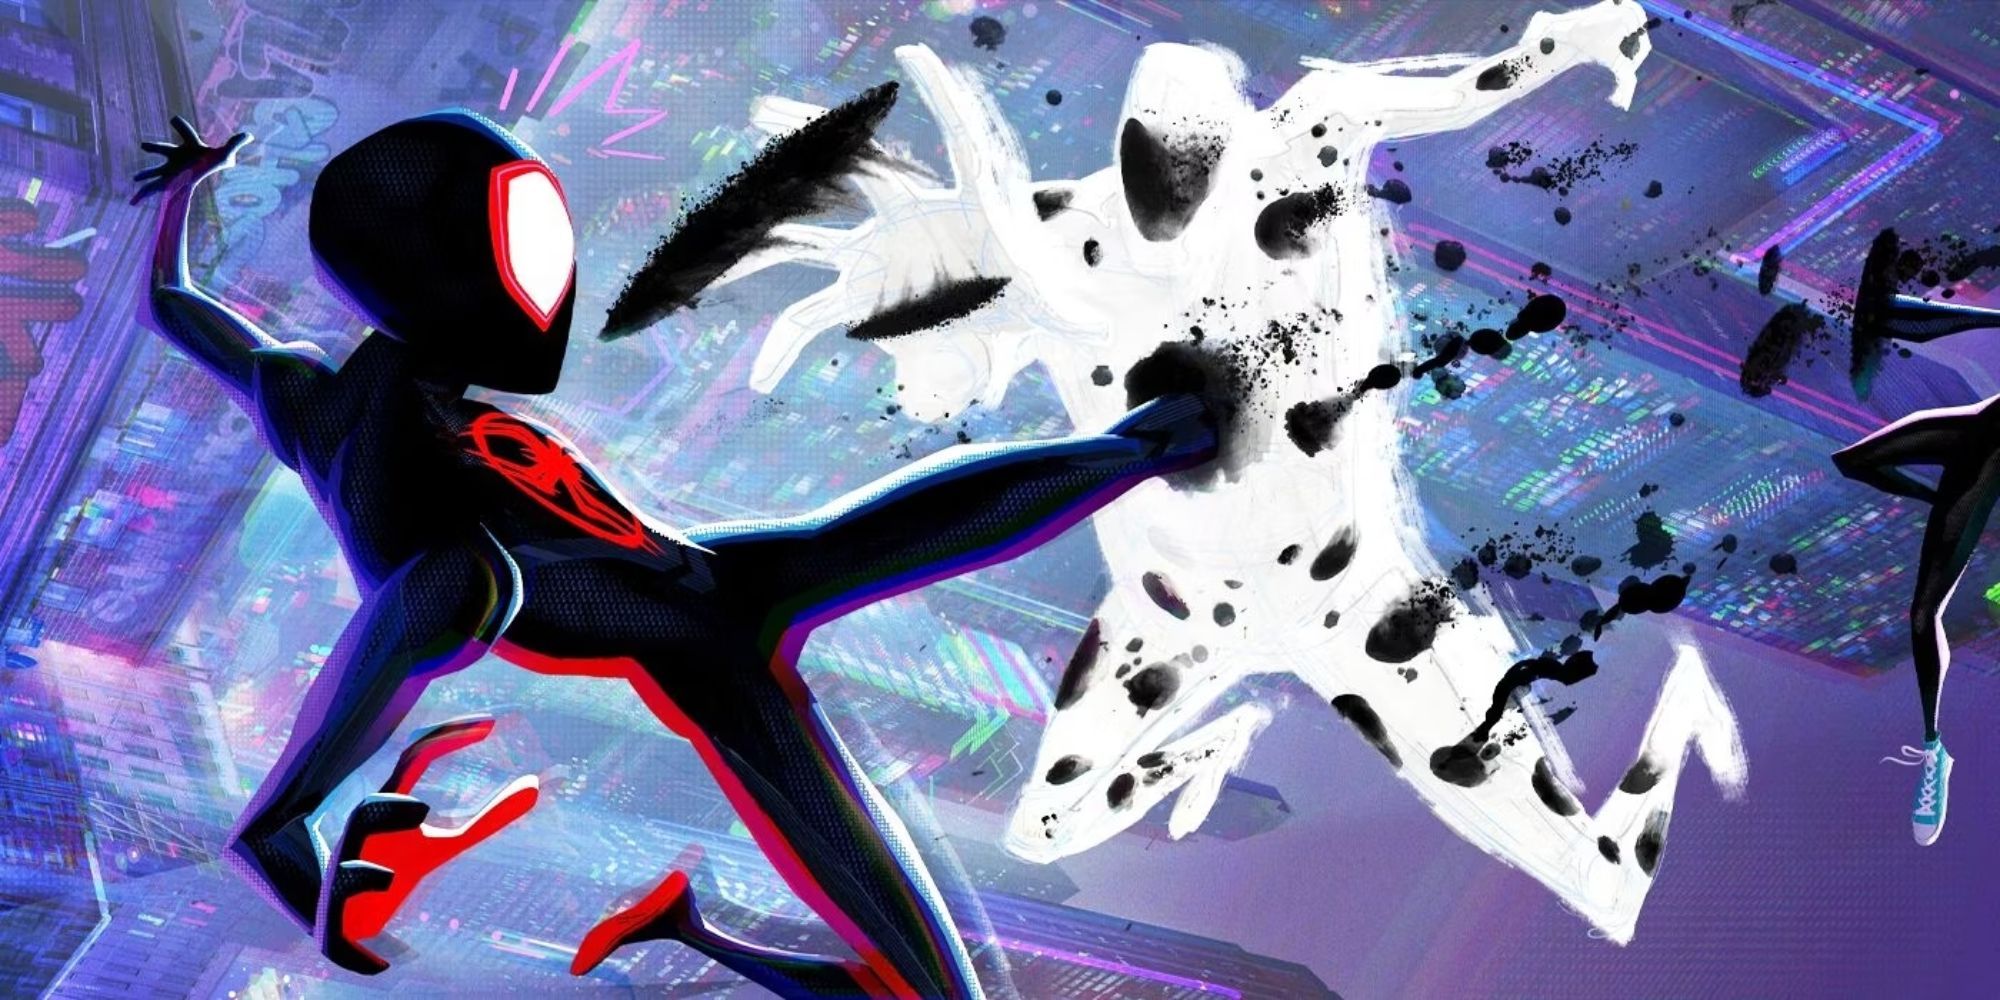 Across The Spider-Verse Image Reveals Close-Up of Miles Morales